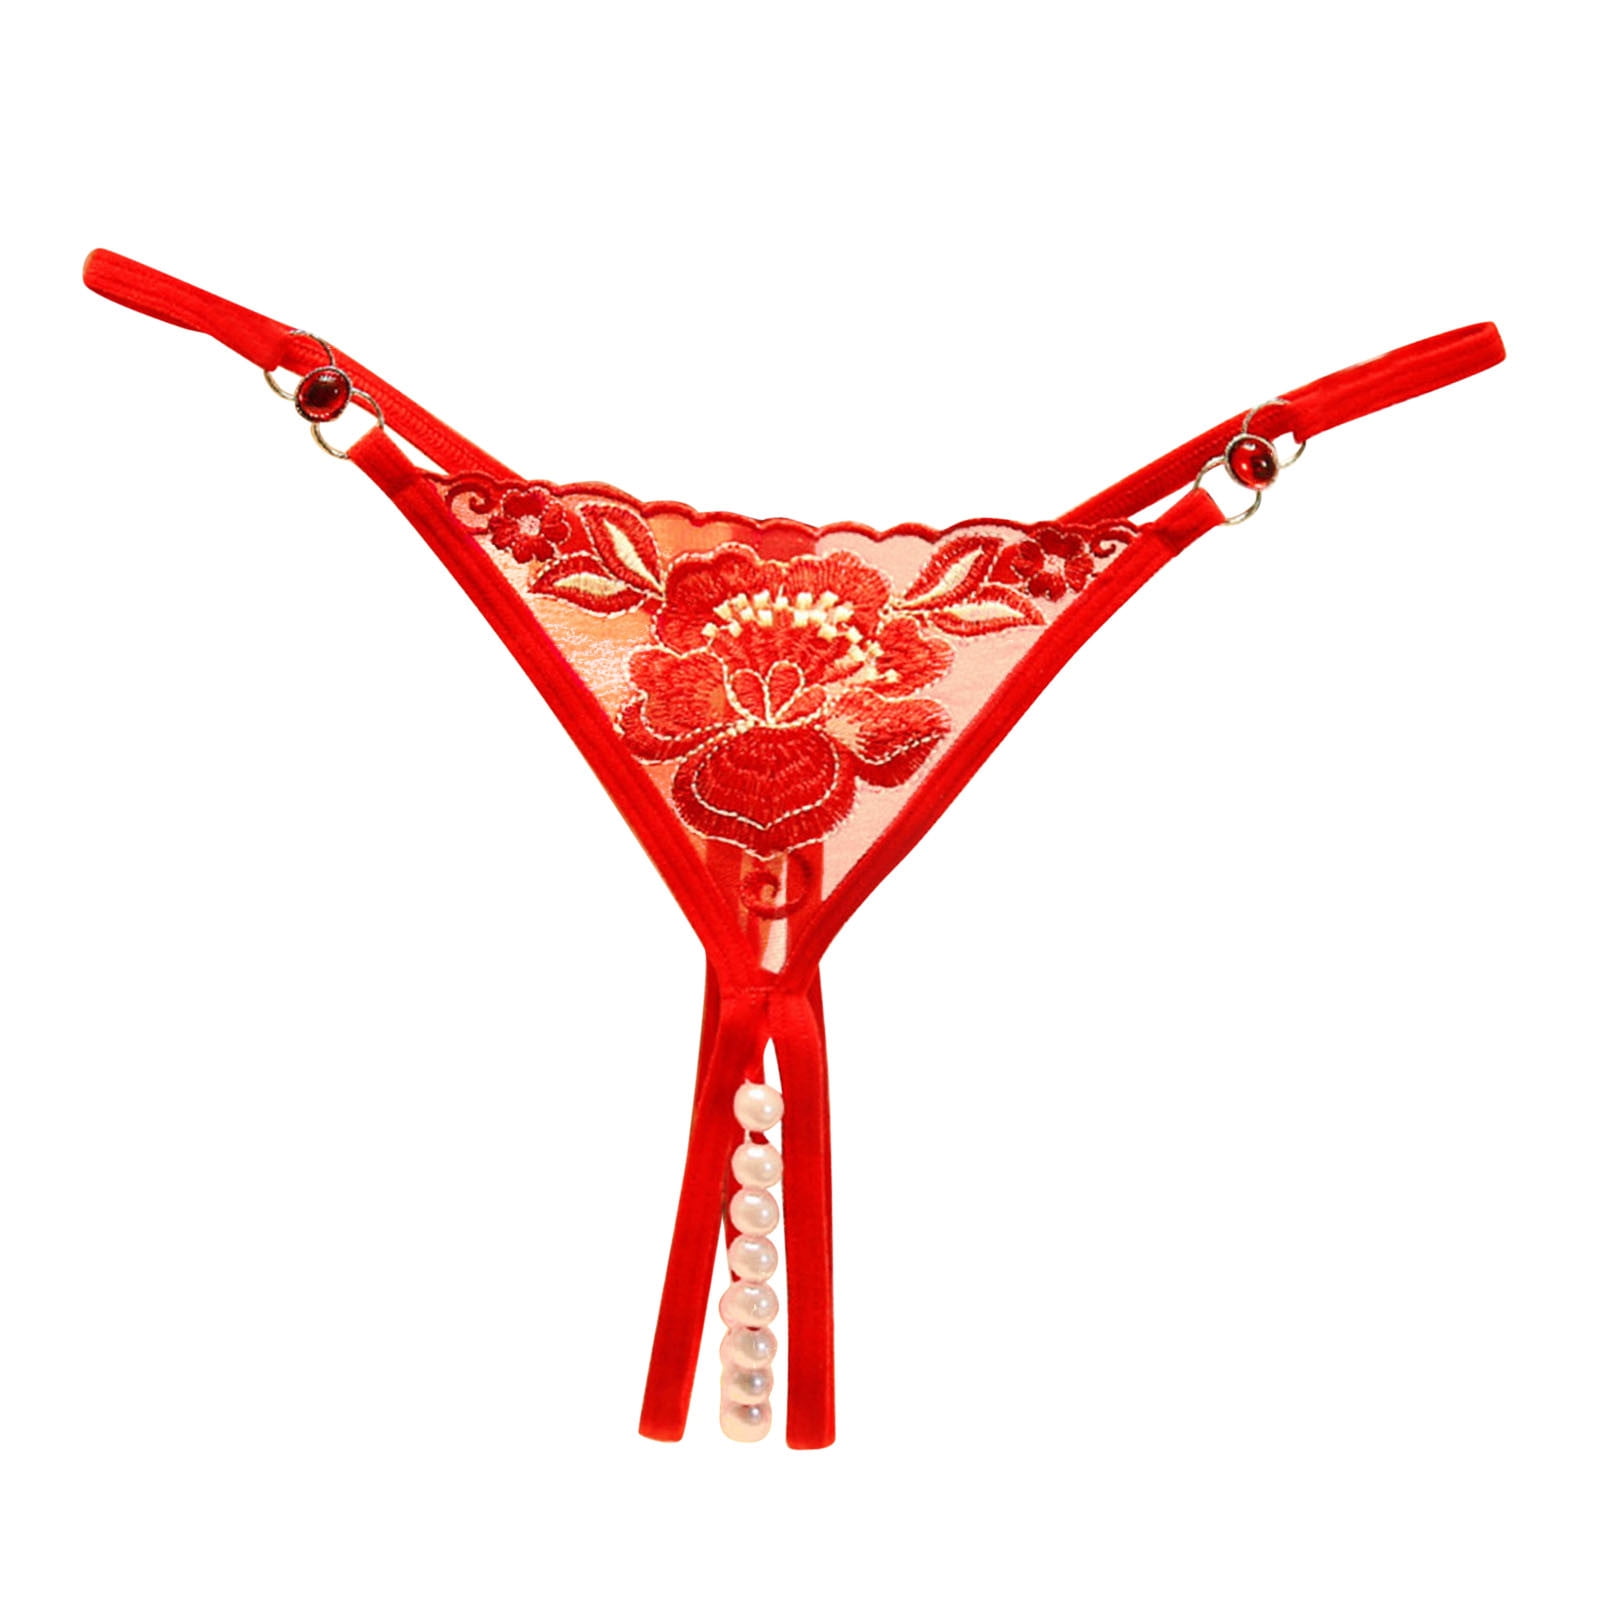 Zuwimk Thongs For Women ,Womens Silk Satin Thong Panties Lace G String  Thong T Back Shiny Satin Underwear Red,One Size